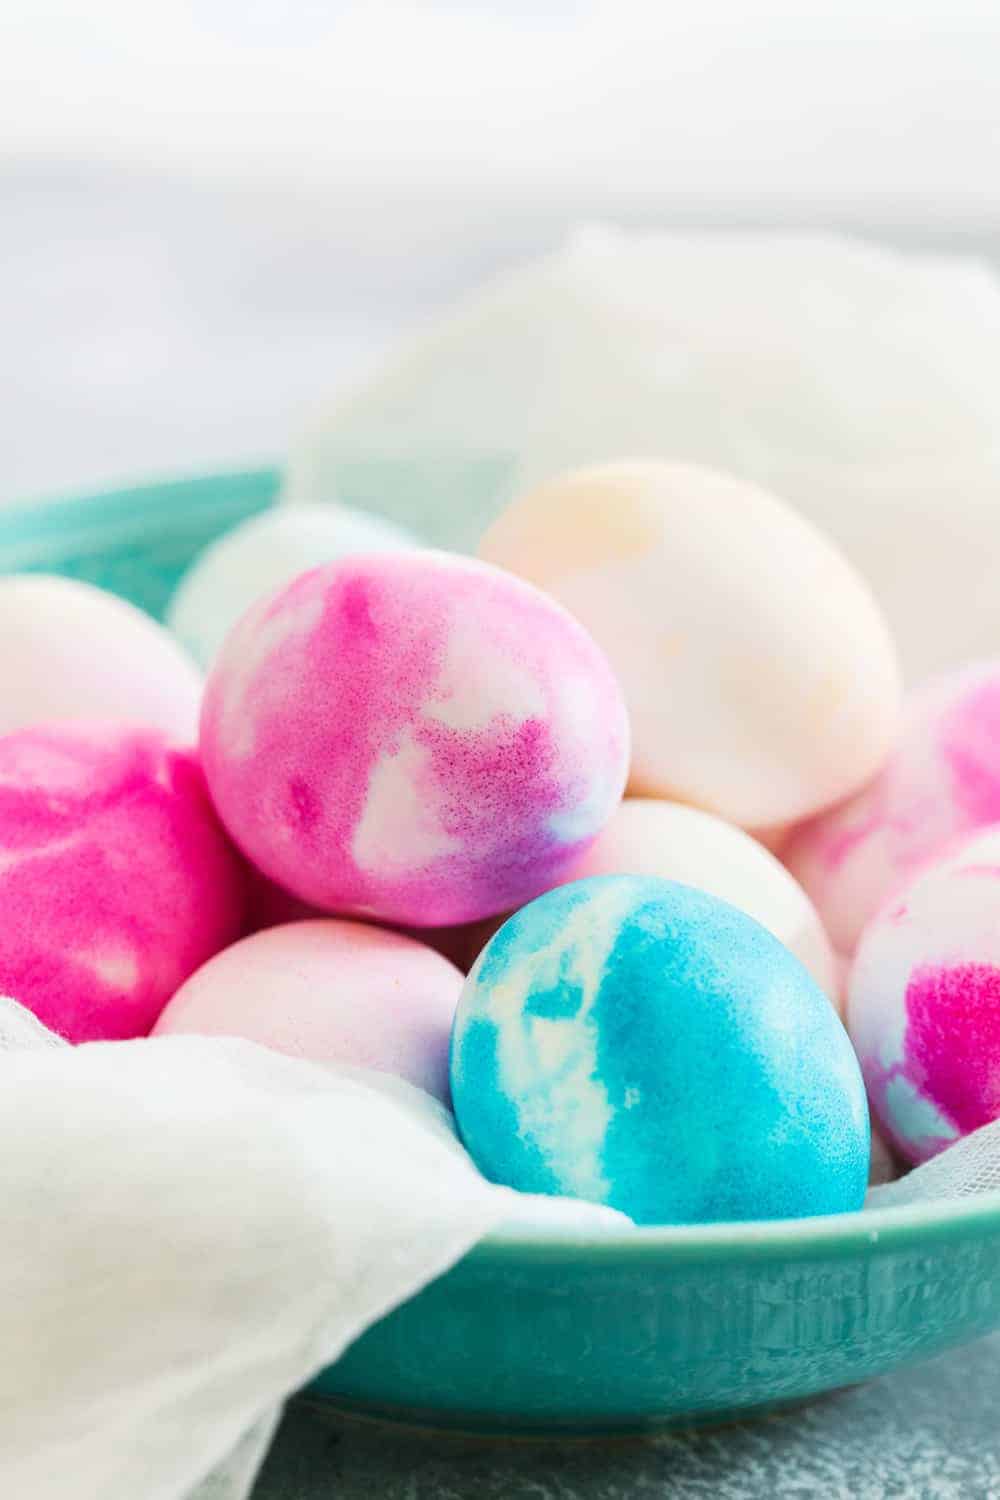 These Whipped Cream Dyed Easter Eggs couldn't be easier, or more fun! They're perfect for Easter!